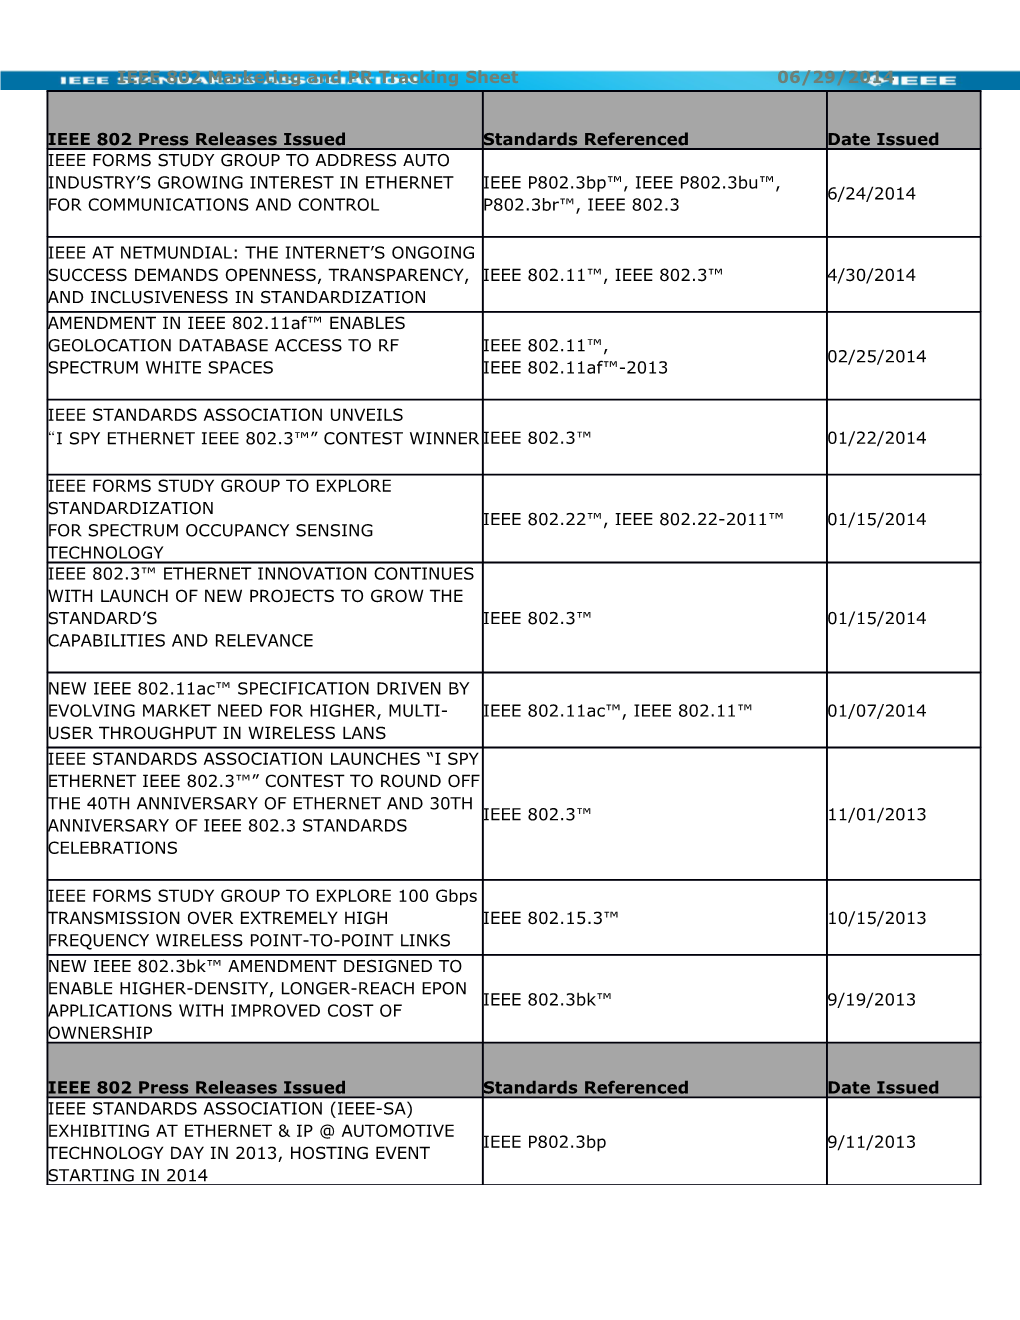 IEEE 802 Marketing and PR Tracking Sheet 06/29/2014